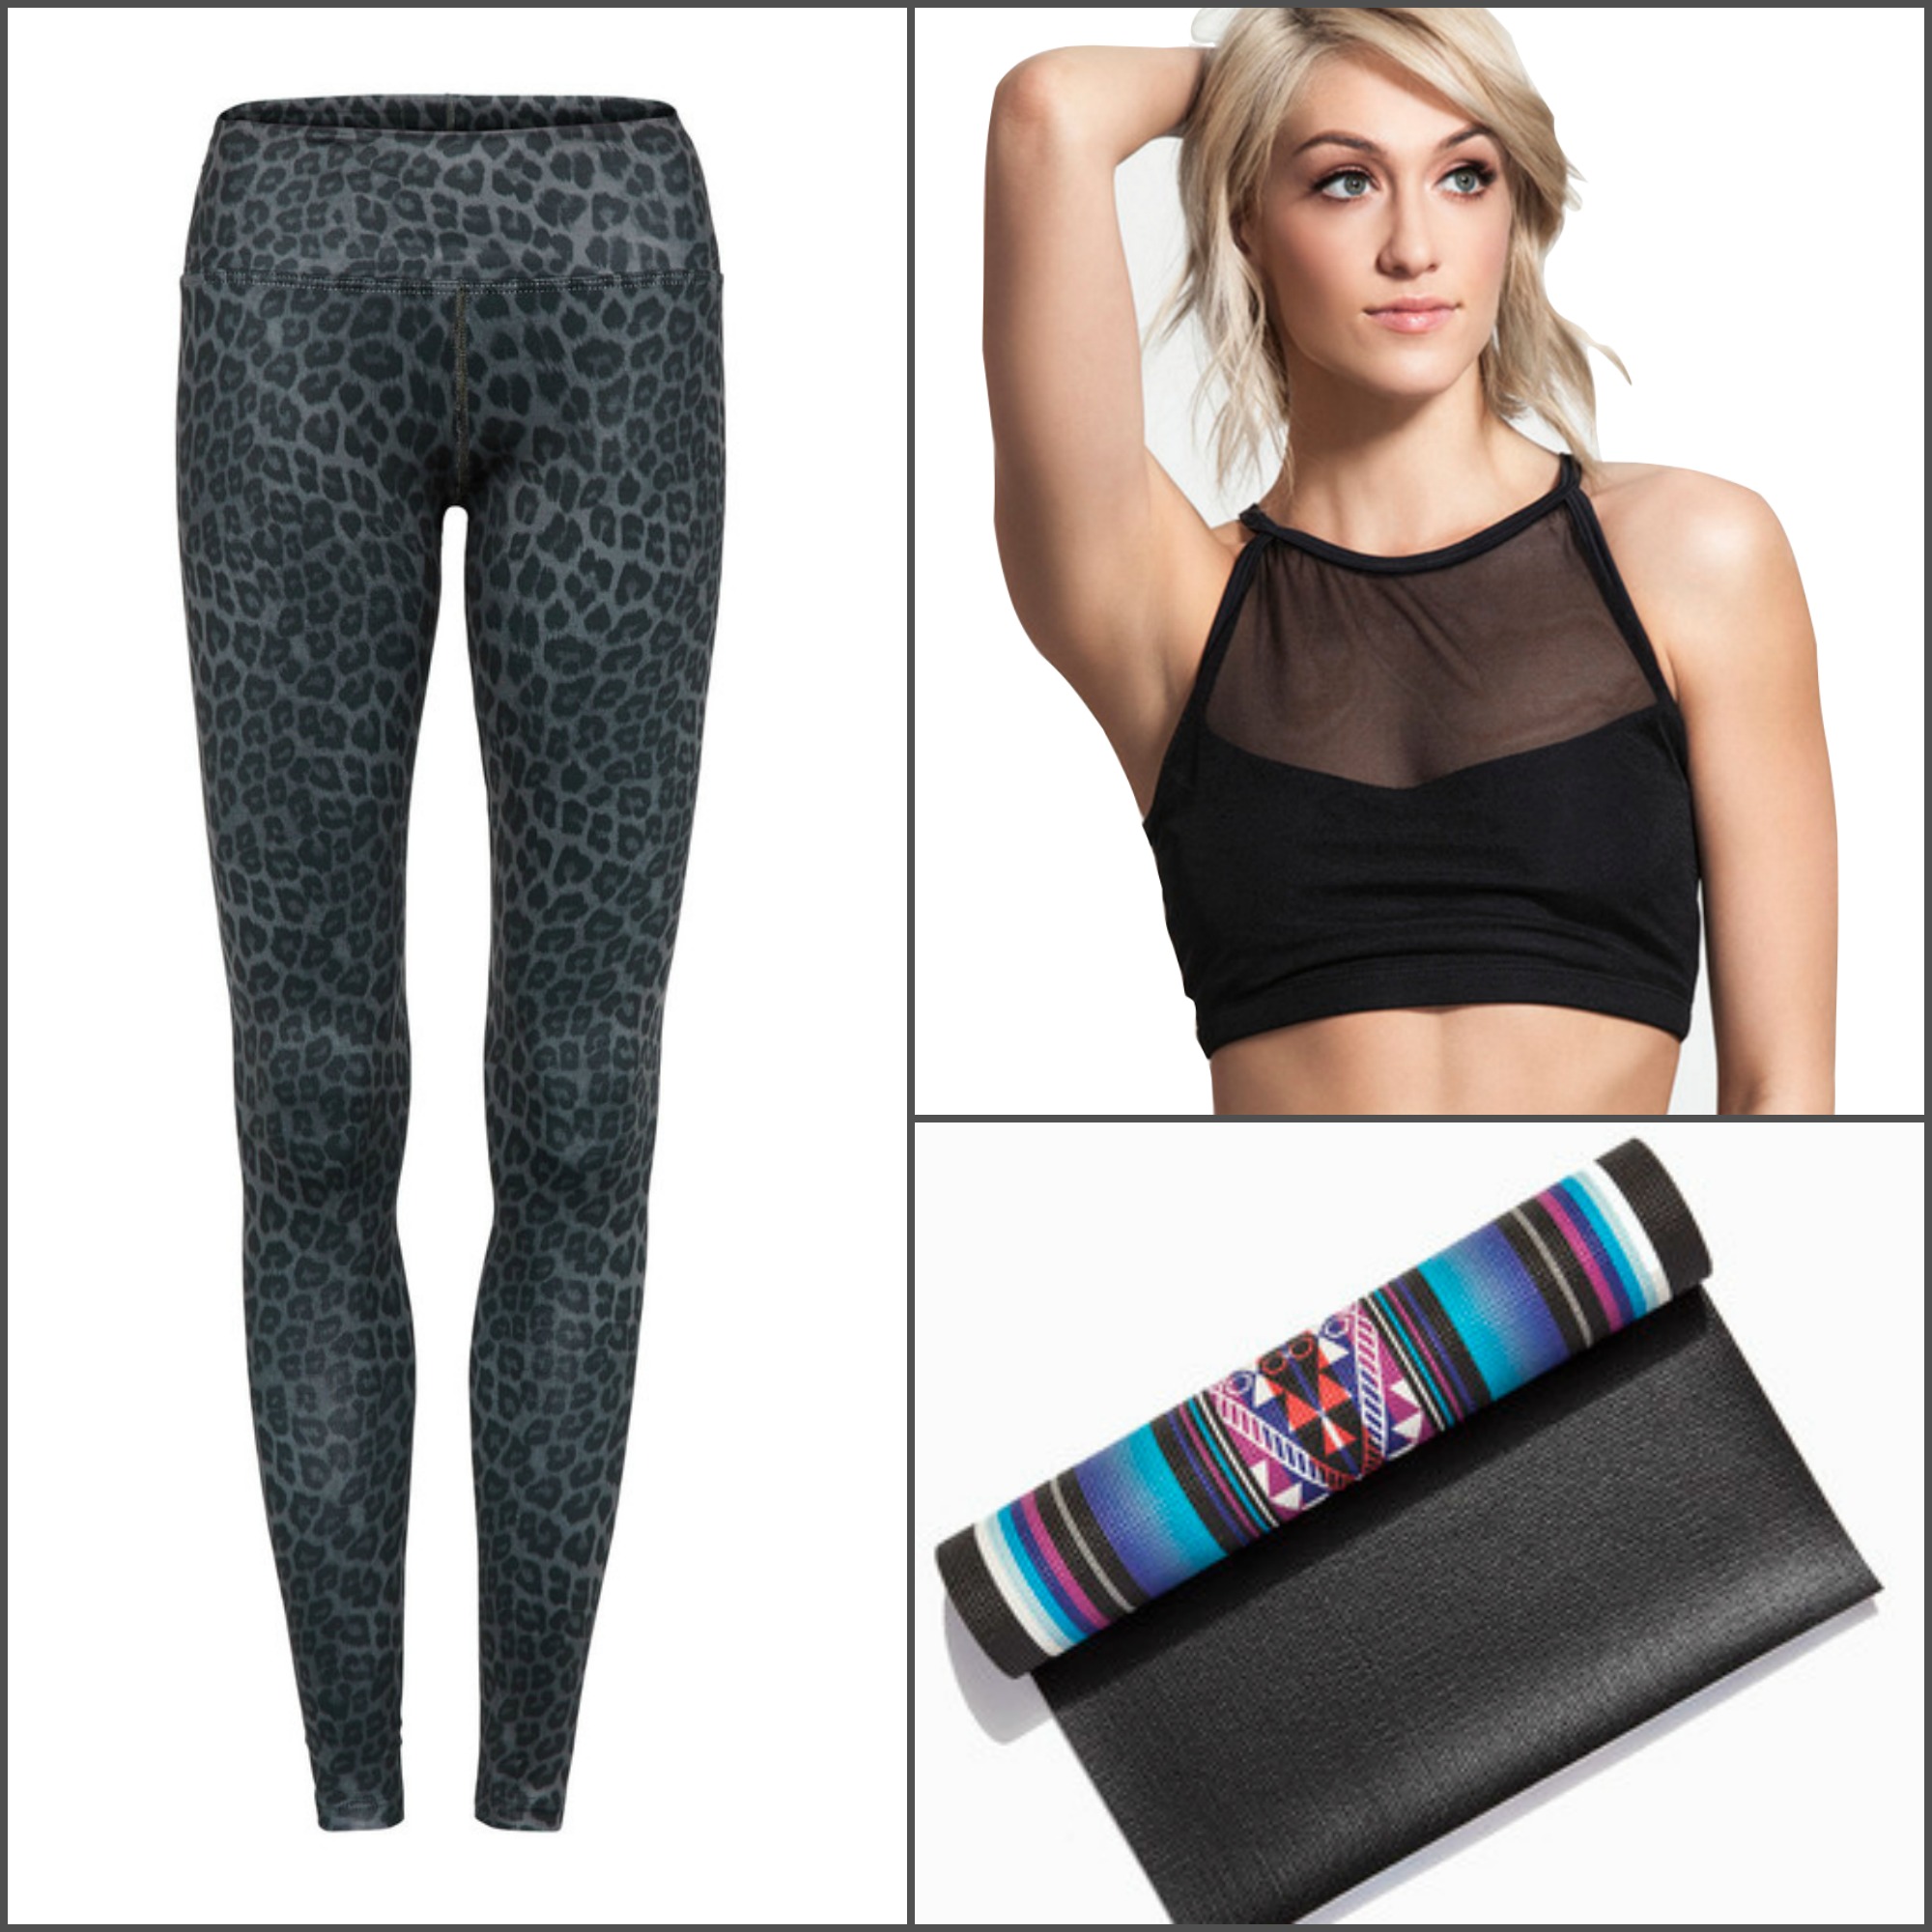 2015 Fitness Gift Guide